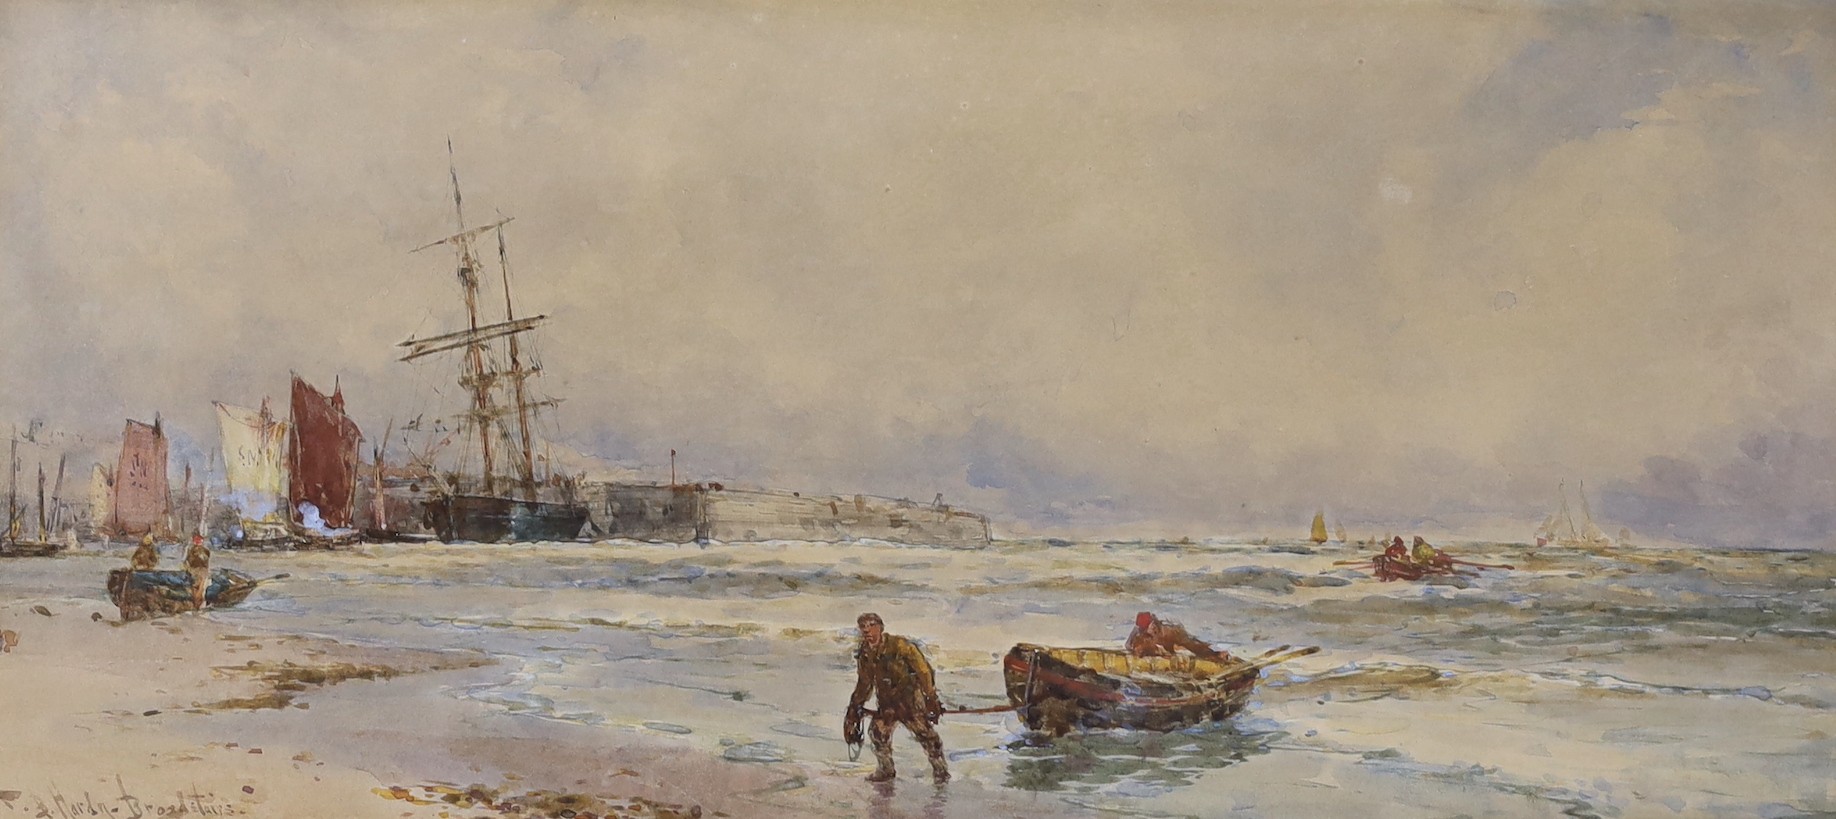 Thomas Bush Hardy RA; RBA (1842-1897), watercolour, 'Broadstairs’’, signed and inscribed, 17 x 37cm